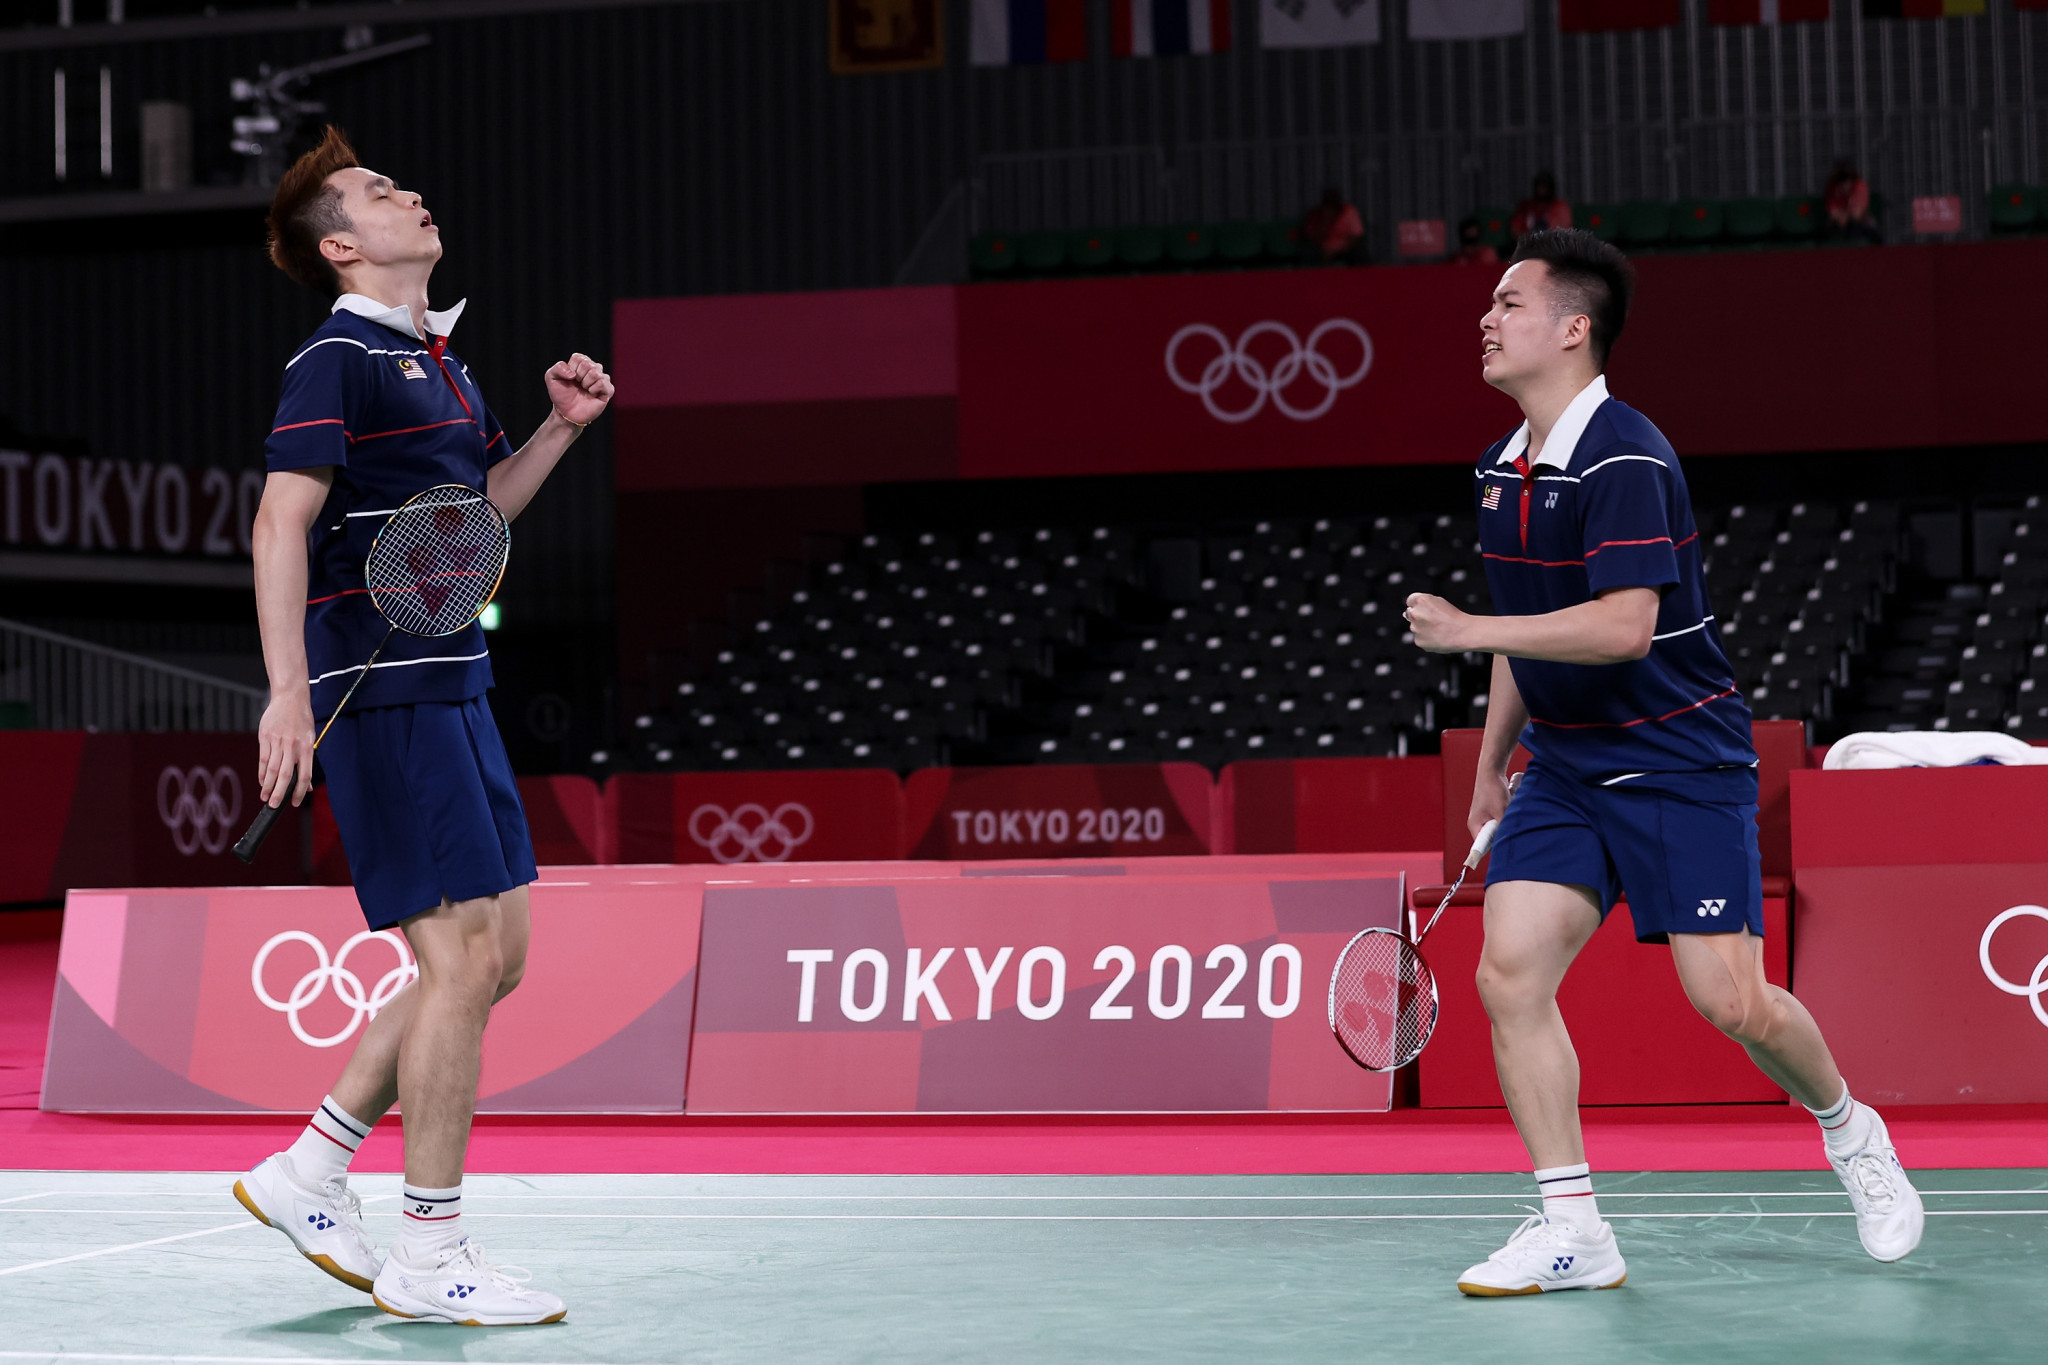 Aaron Chia, right, and Soh Wooi Yik, left, won men's doubles badminton bronze for Malaysia at the Tokyo 2020 Olympics ©Getty Images